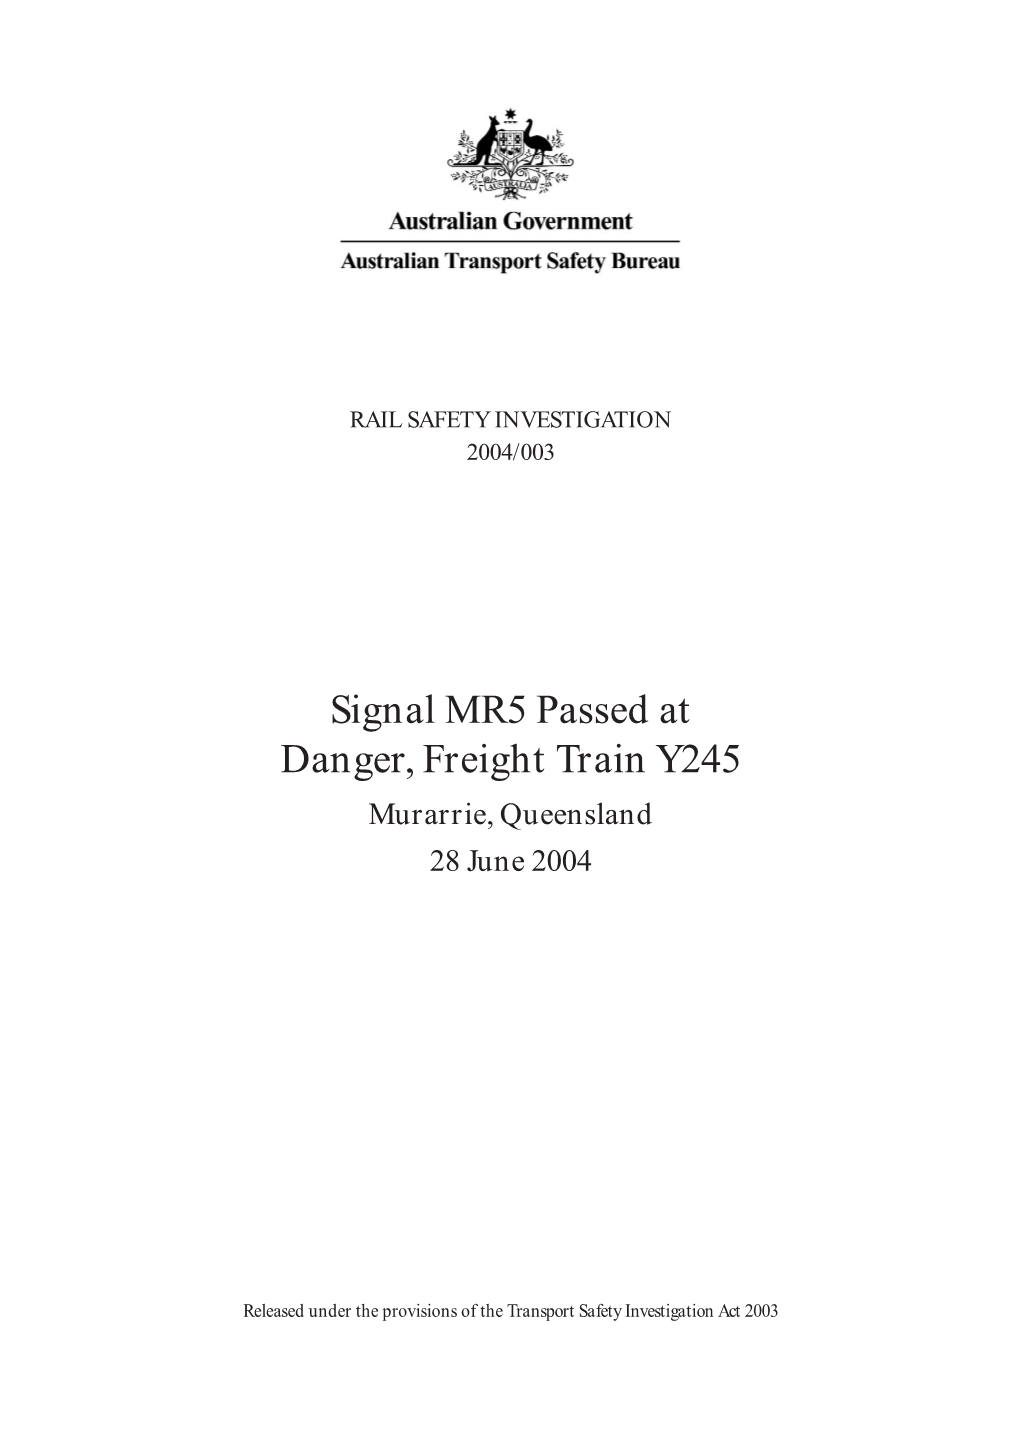 Signal MR5 Passed at Danger, Freight Train Y245 Murarrie, Queensland 28 June 2004